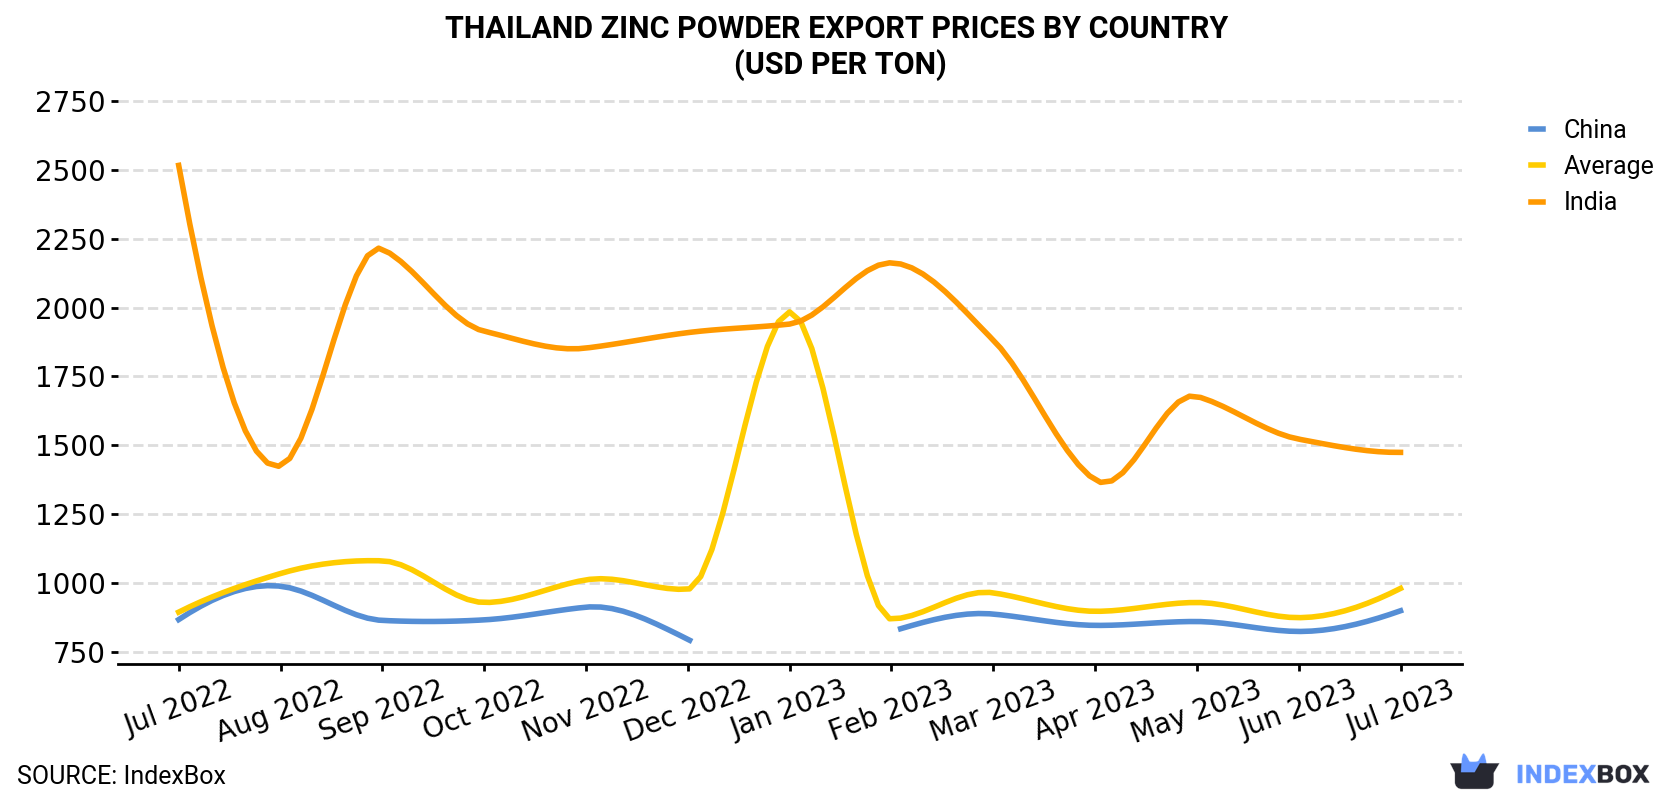 Thailand Zinc Powder Export Prices By Country (USD Per Ton)